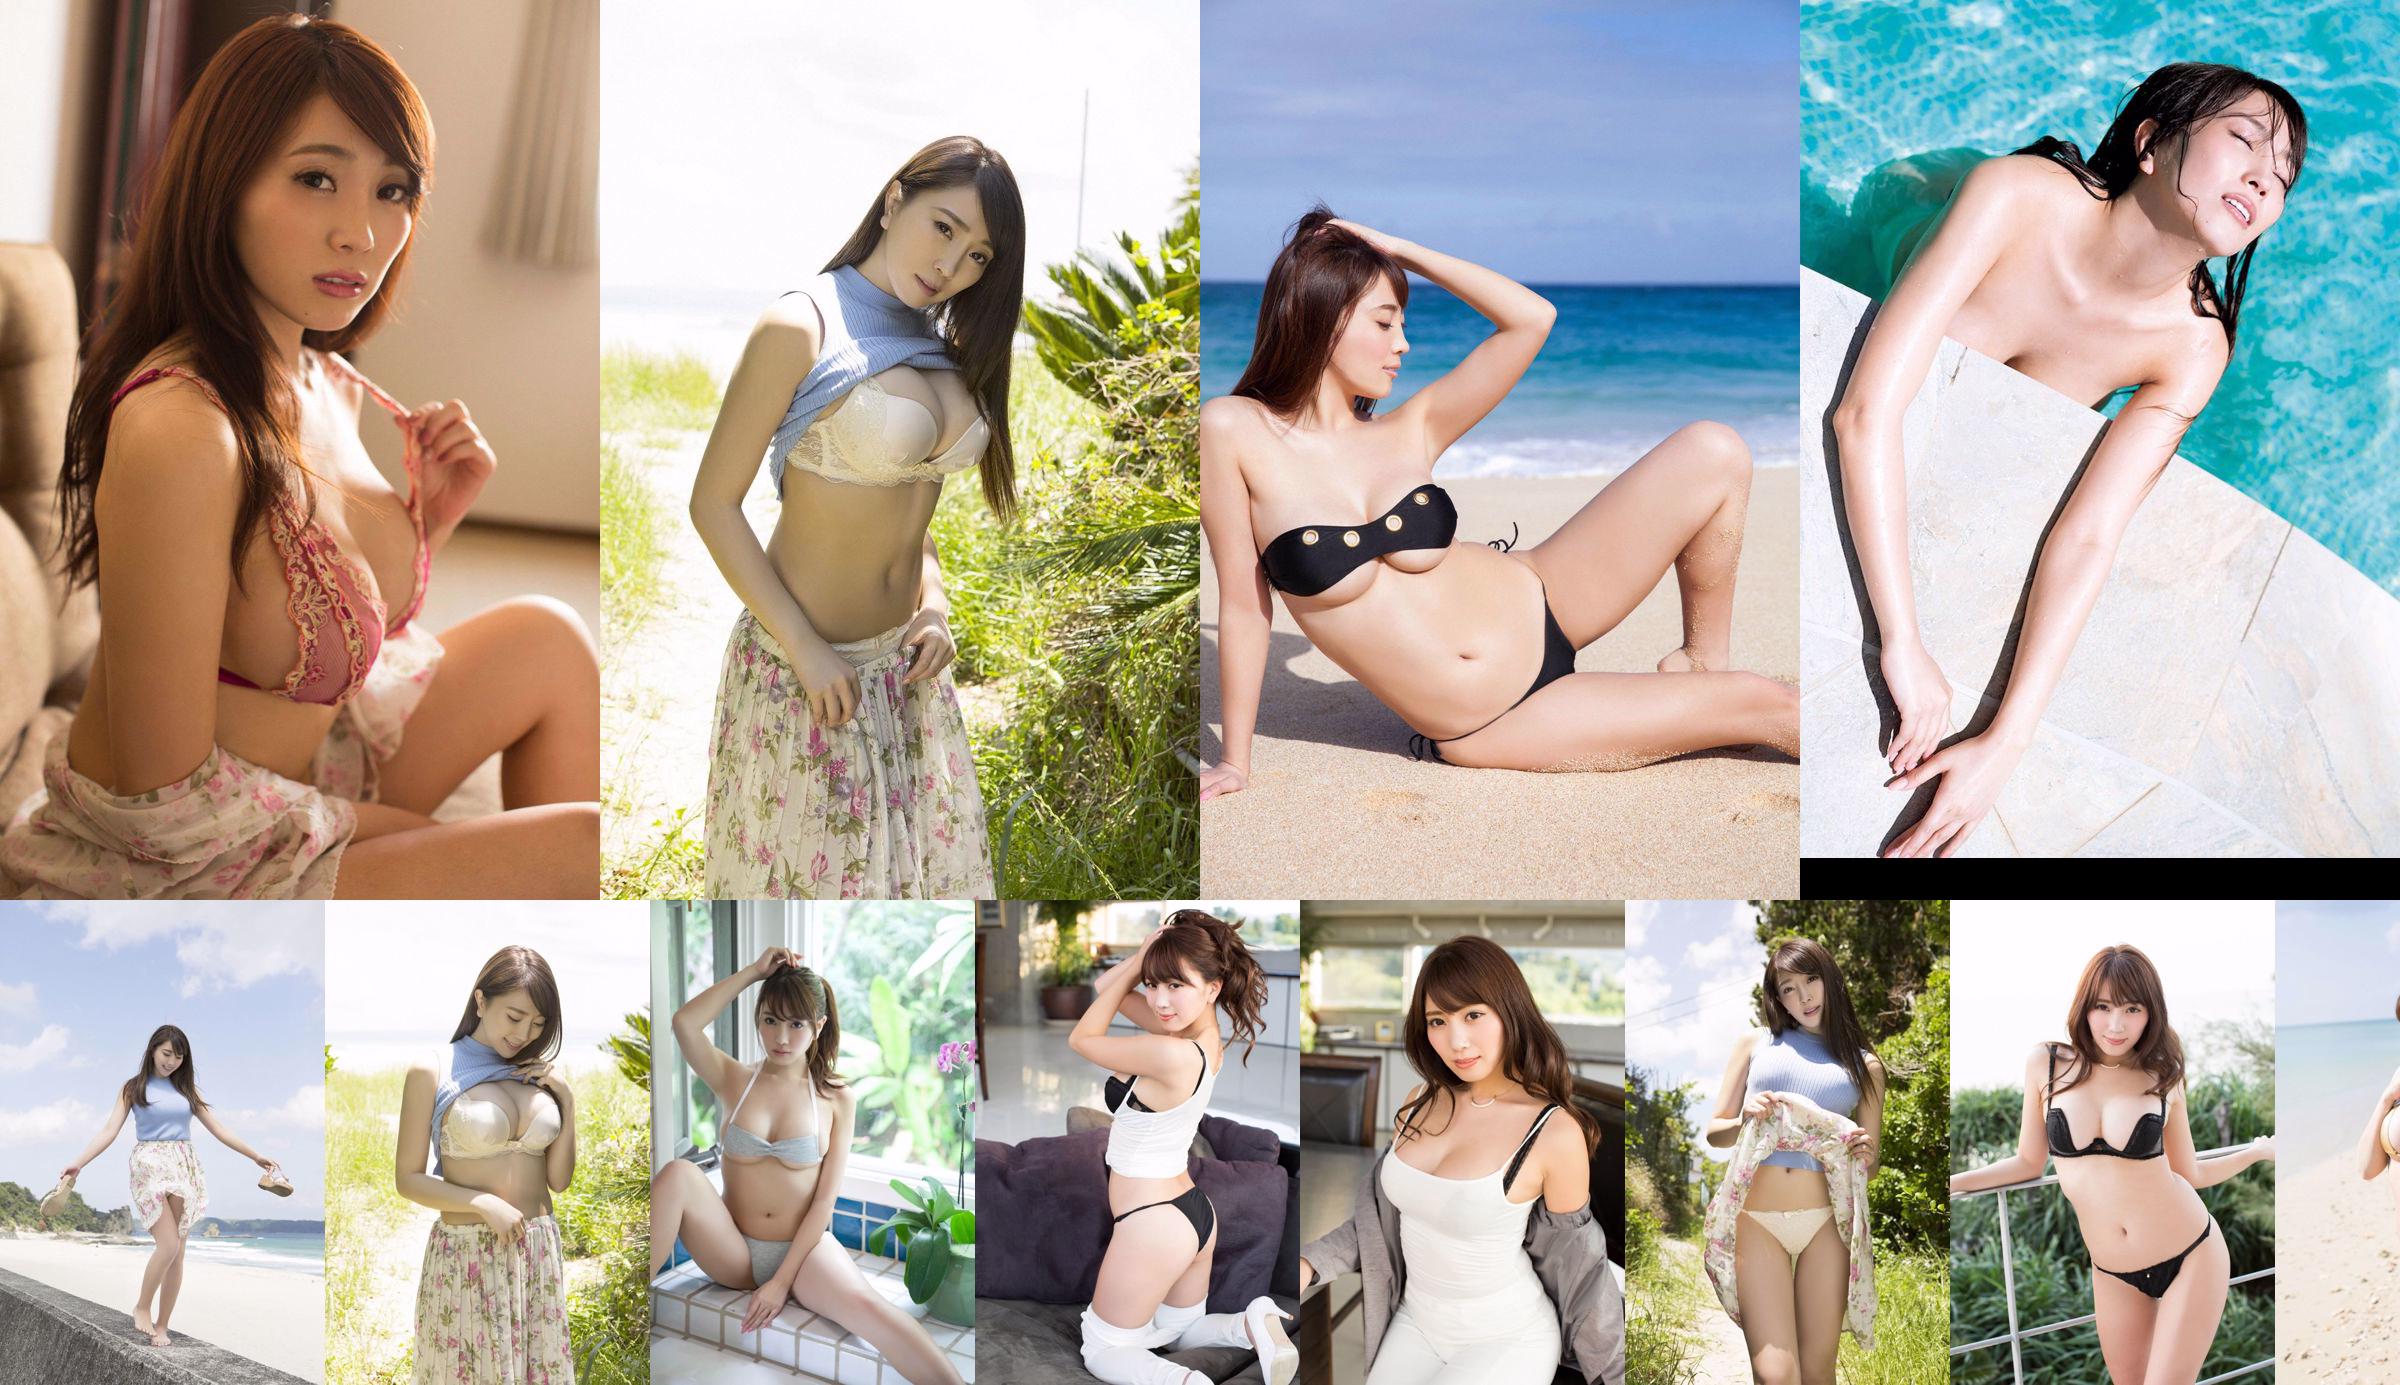 Yume Takeda Yume Takeda / Yume Takeda [Graphis] Gravure First off daughter No.4ab549 Page 3